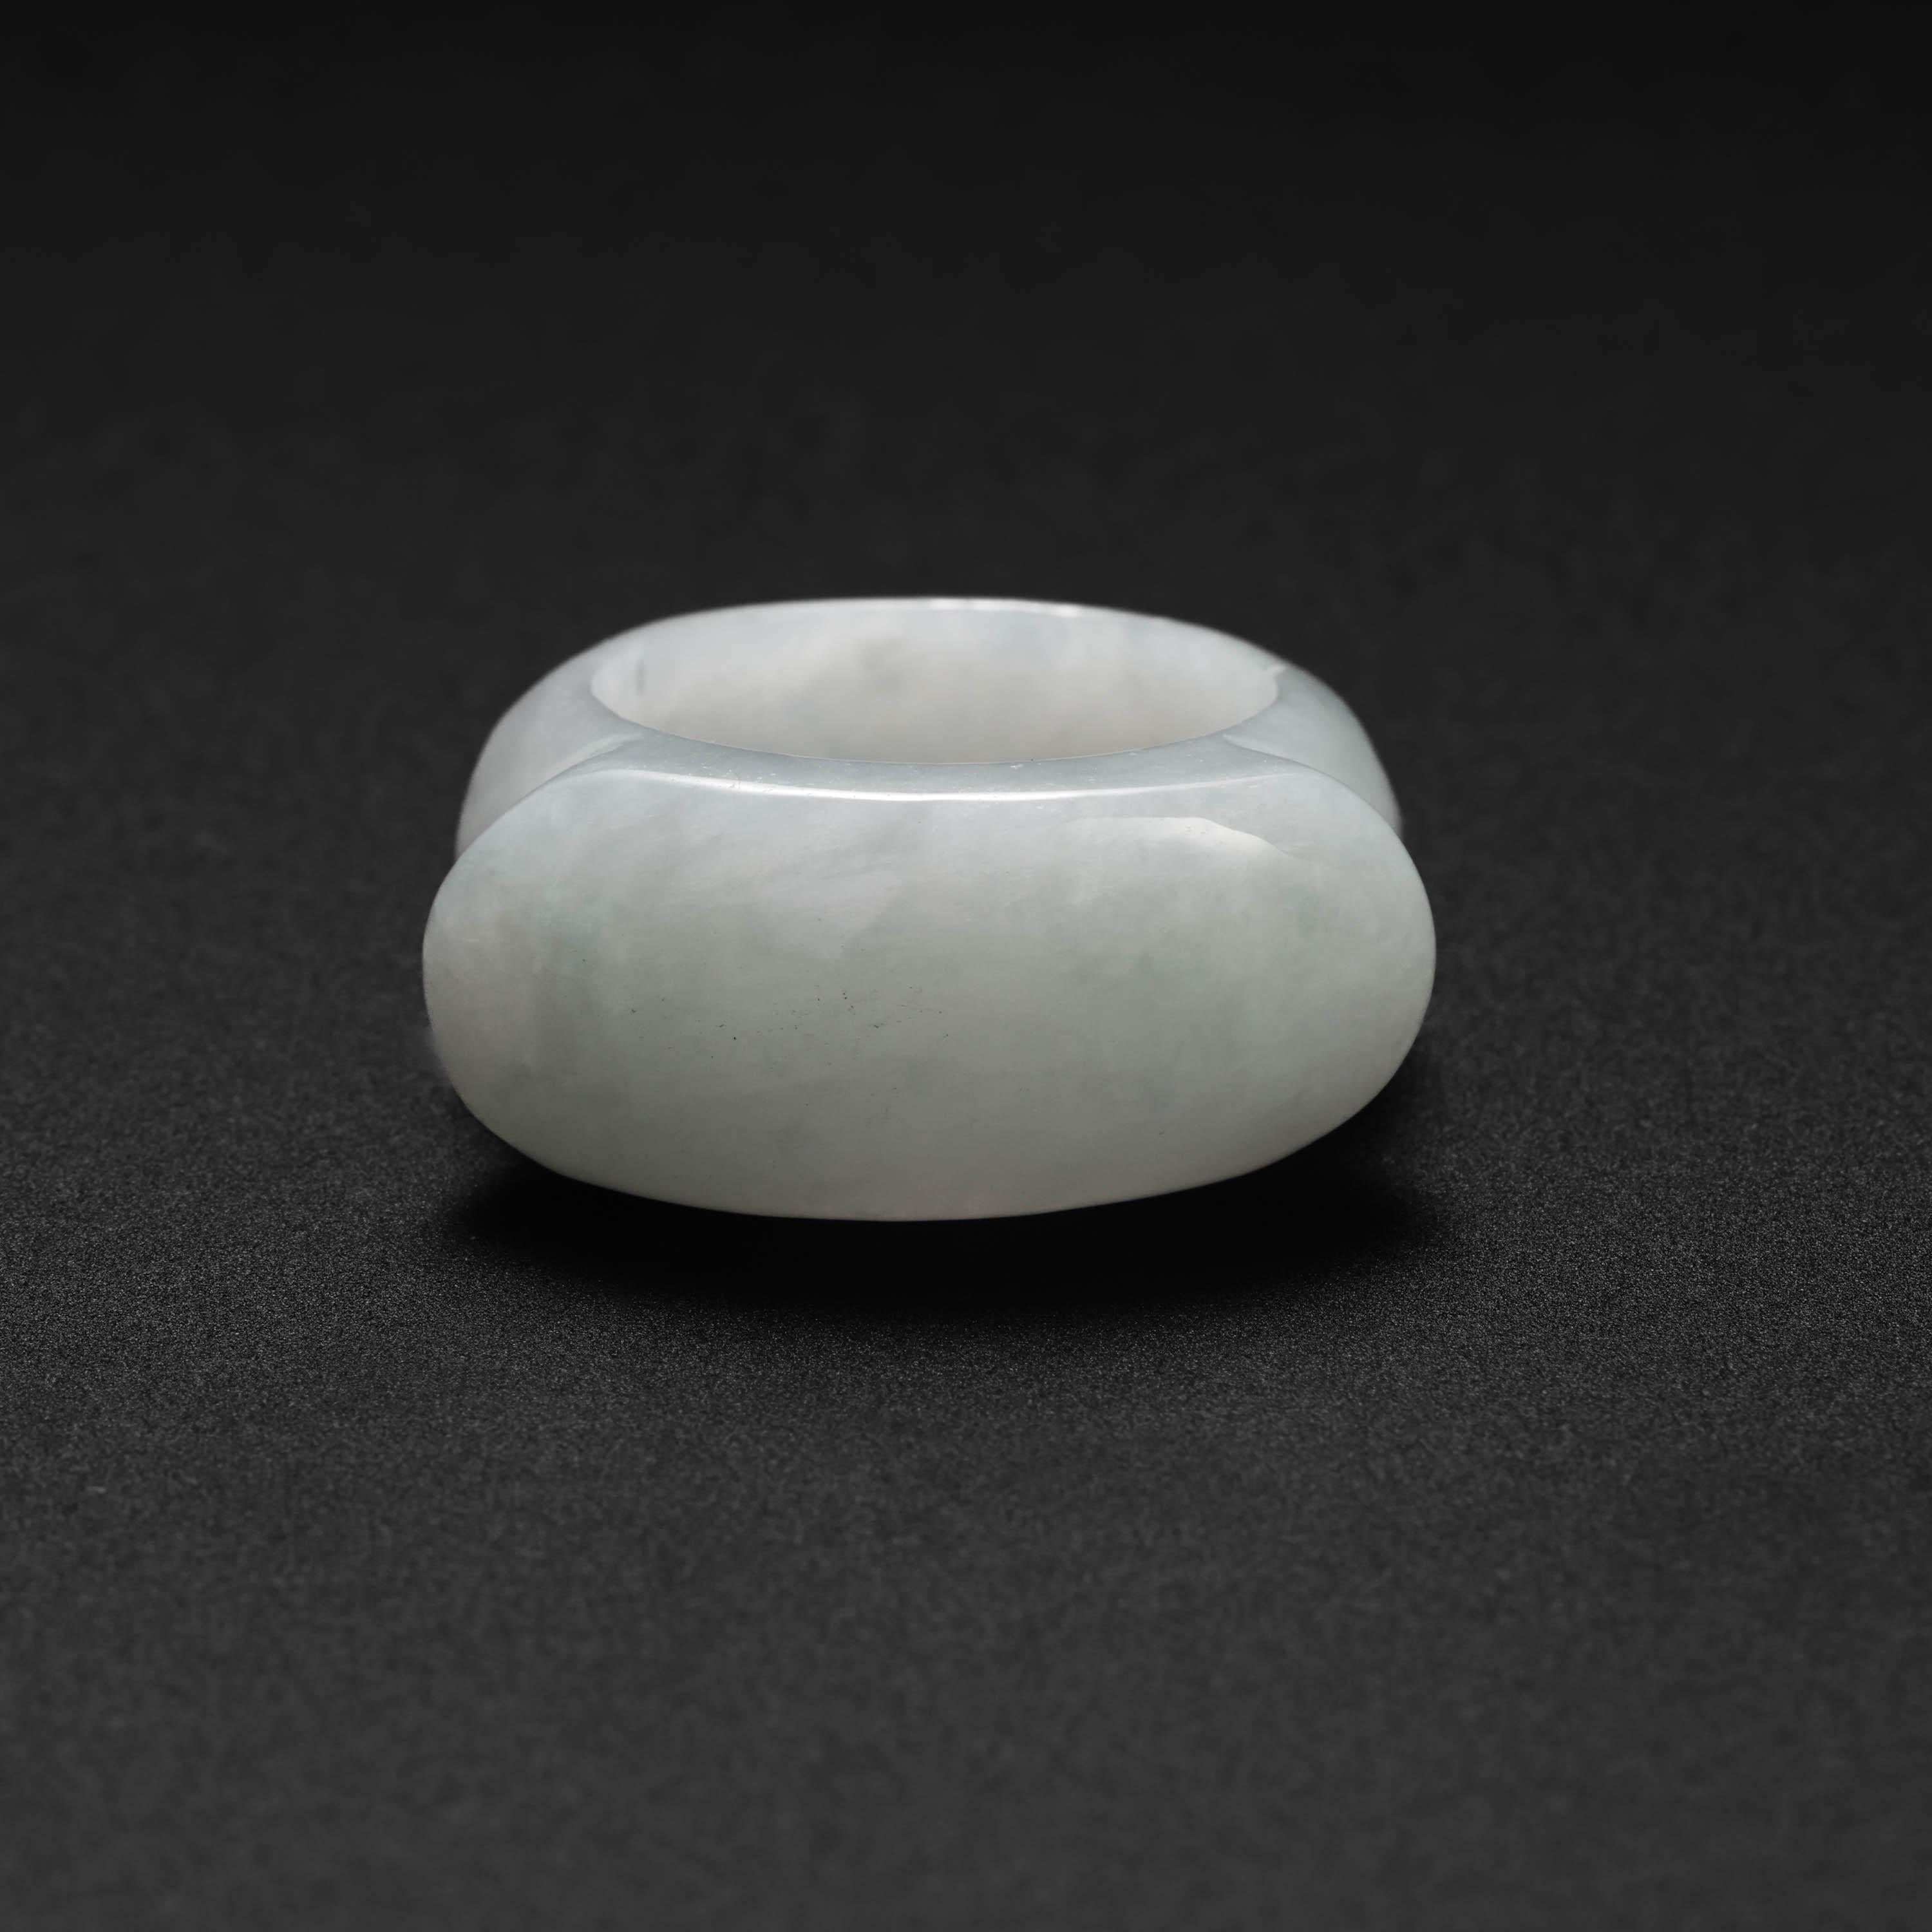 This ring was carved from a single piece of certified natural and untreated Burmese jadeite jade. The gleaming high-polish creates a circle of reflected light all the way around the band. And the high-translucency of the stone makes the ring appear